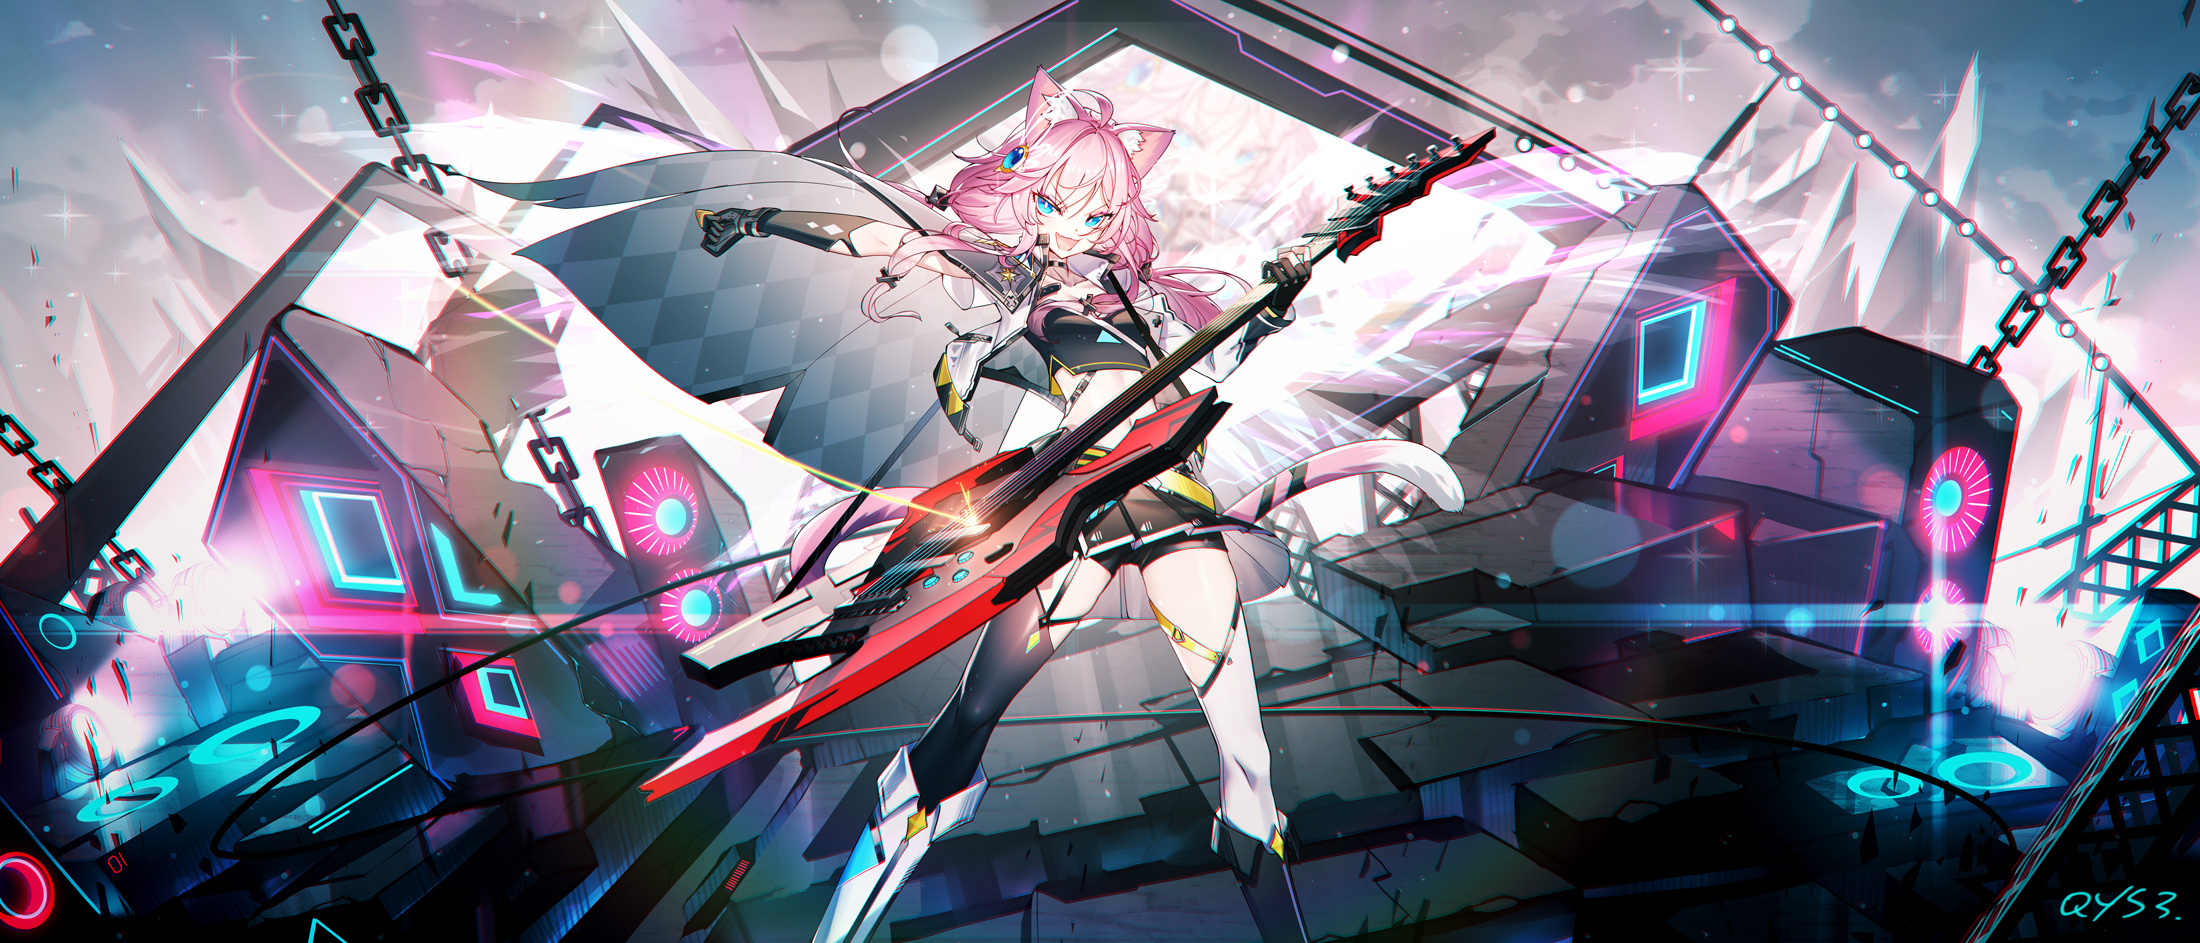 Anime 2200x943 anime anime girls sound system speakers pink hair chains electric guitar guitar Bai Yemeng plectrum cat girl cat ears cat tail blue eyes open mouth choker musical instrument stars